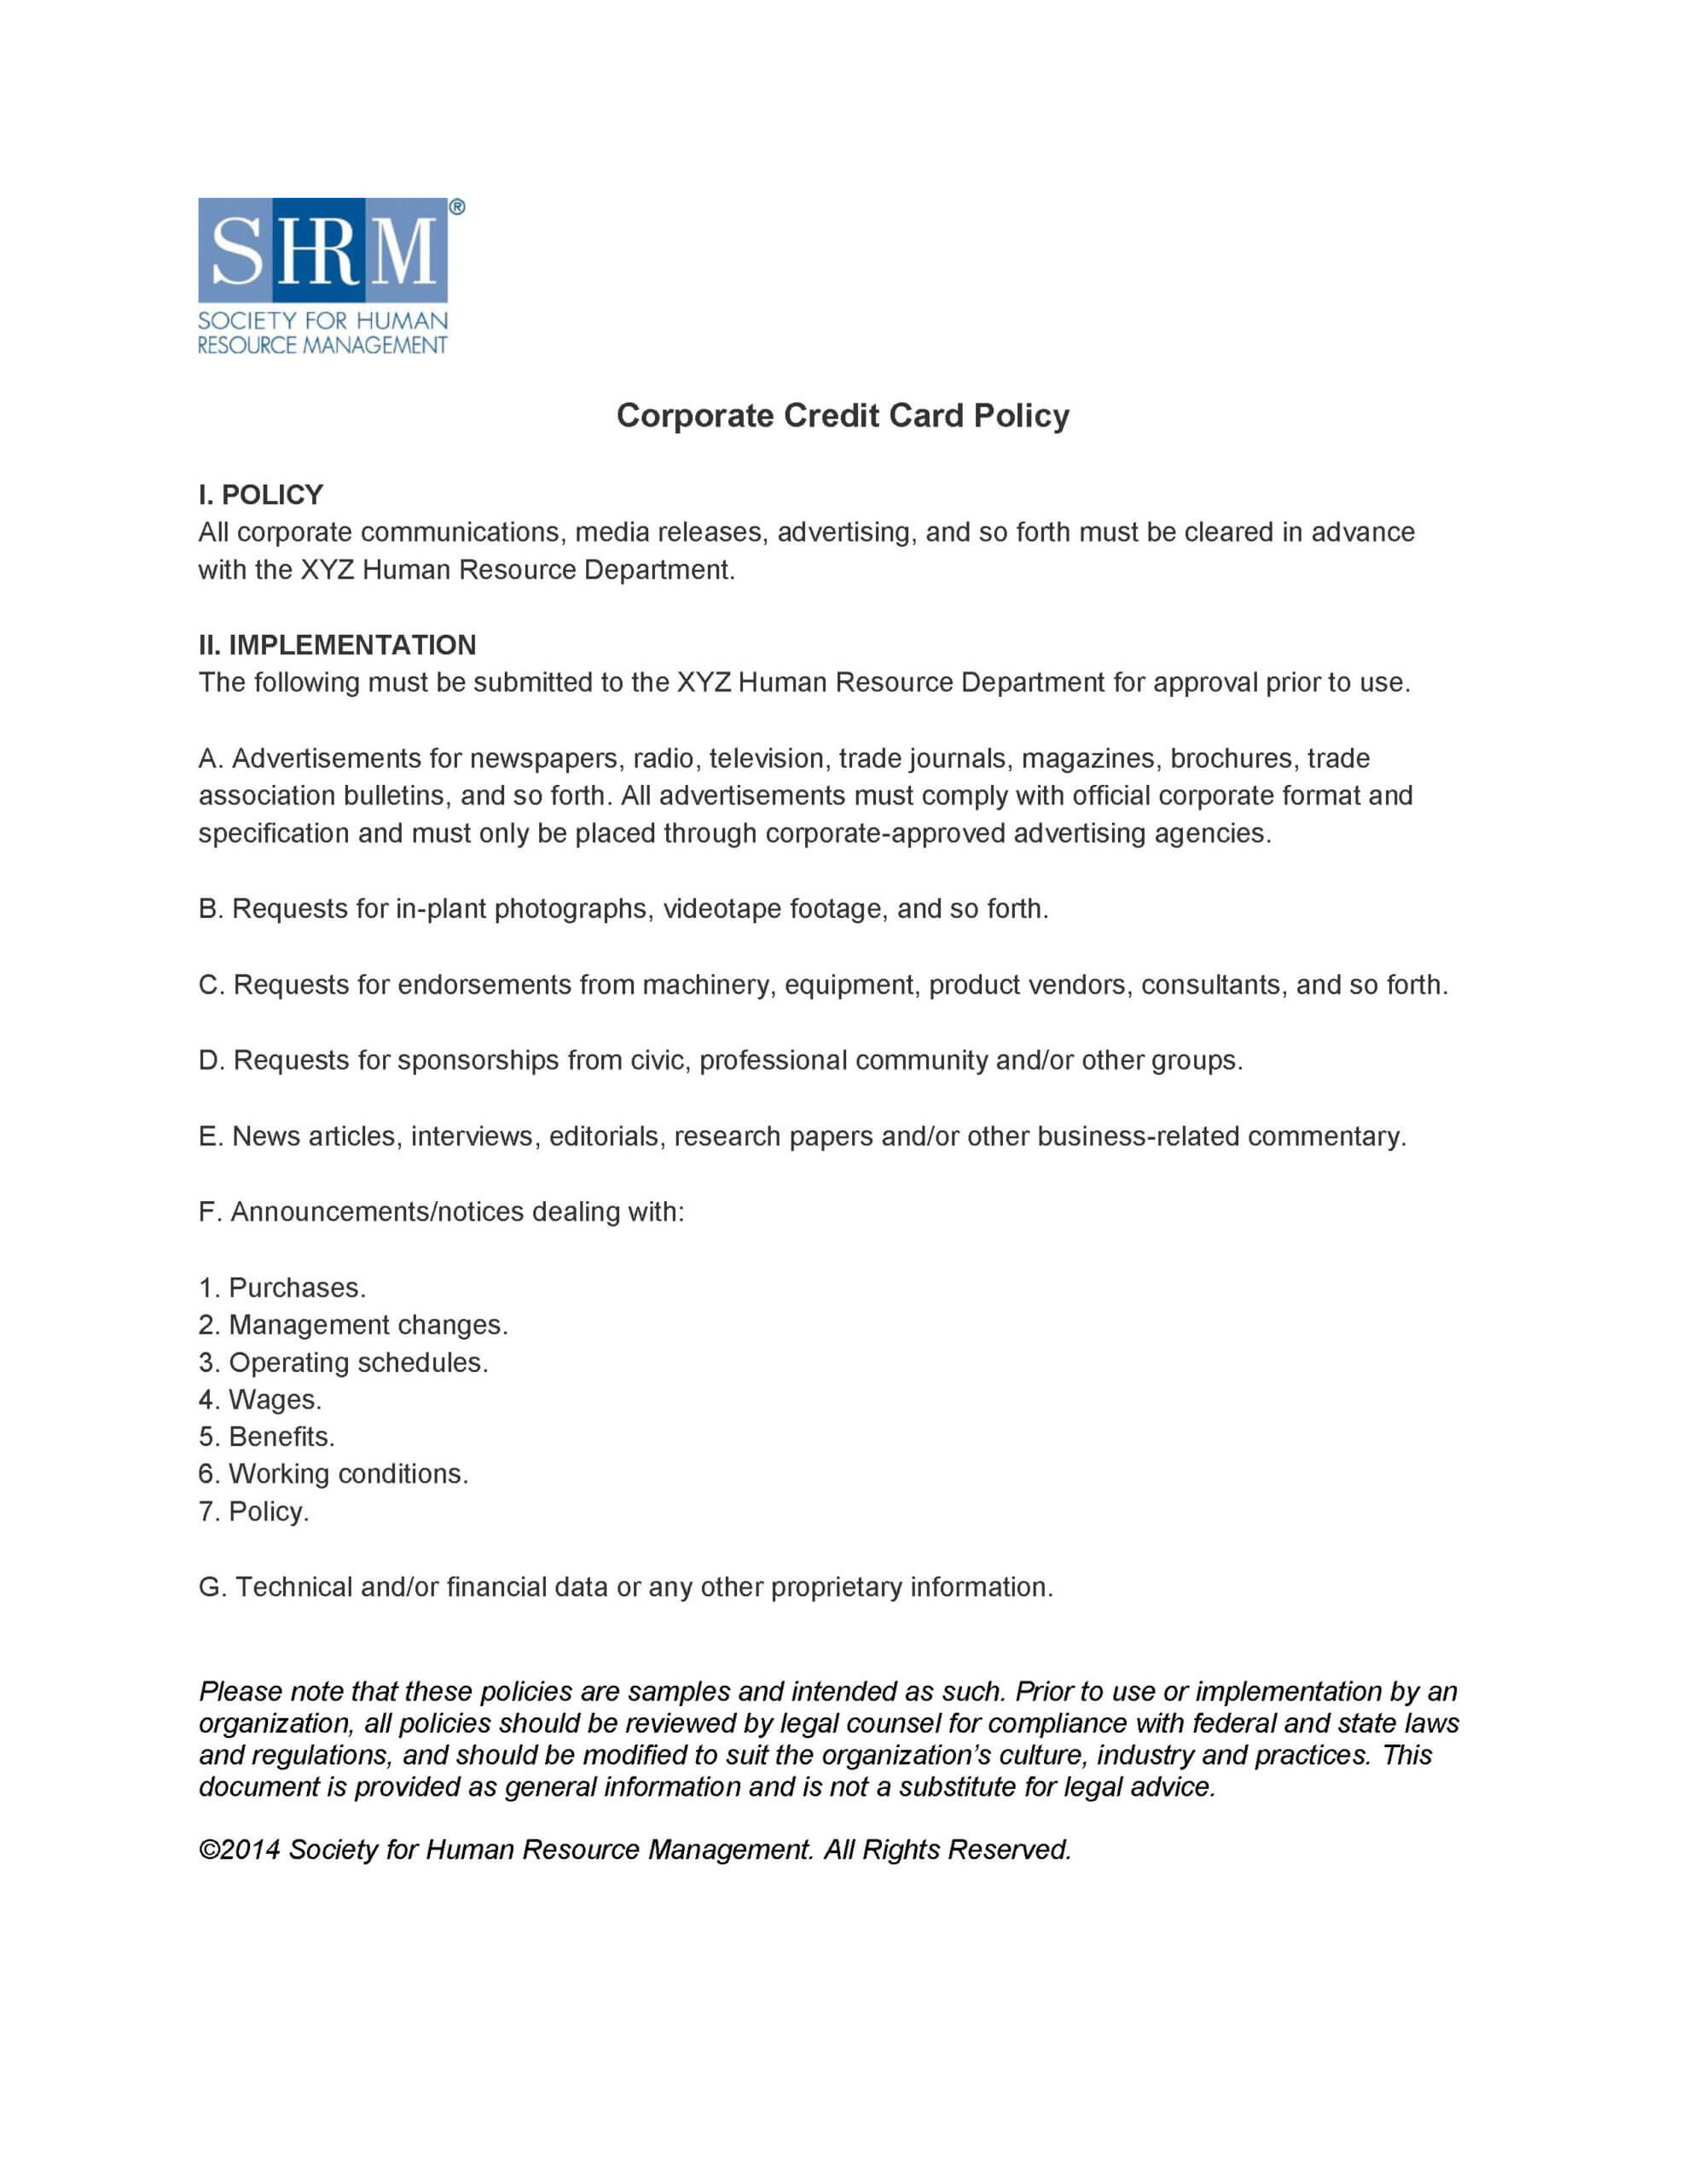 Corporate Credit Card Policy | Alexander Street, A Proquest Intended For Company Credit Card Policy Template